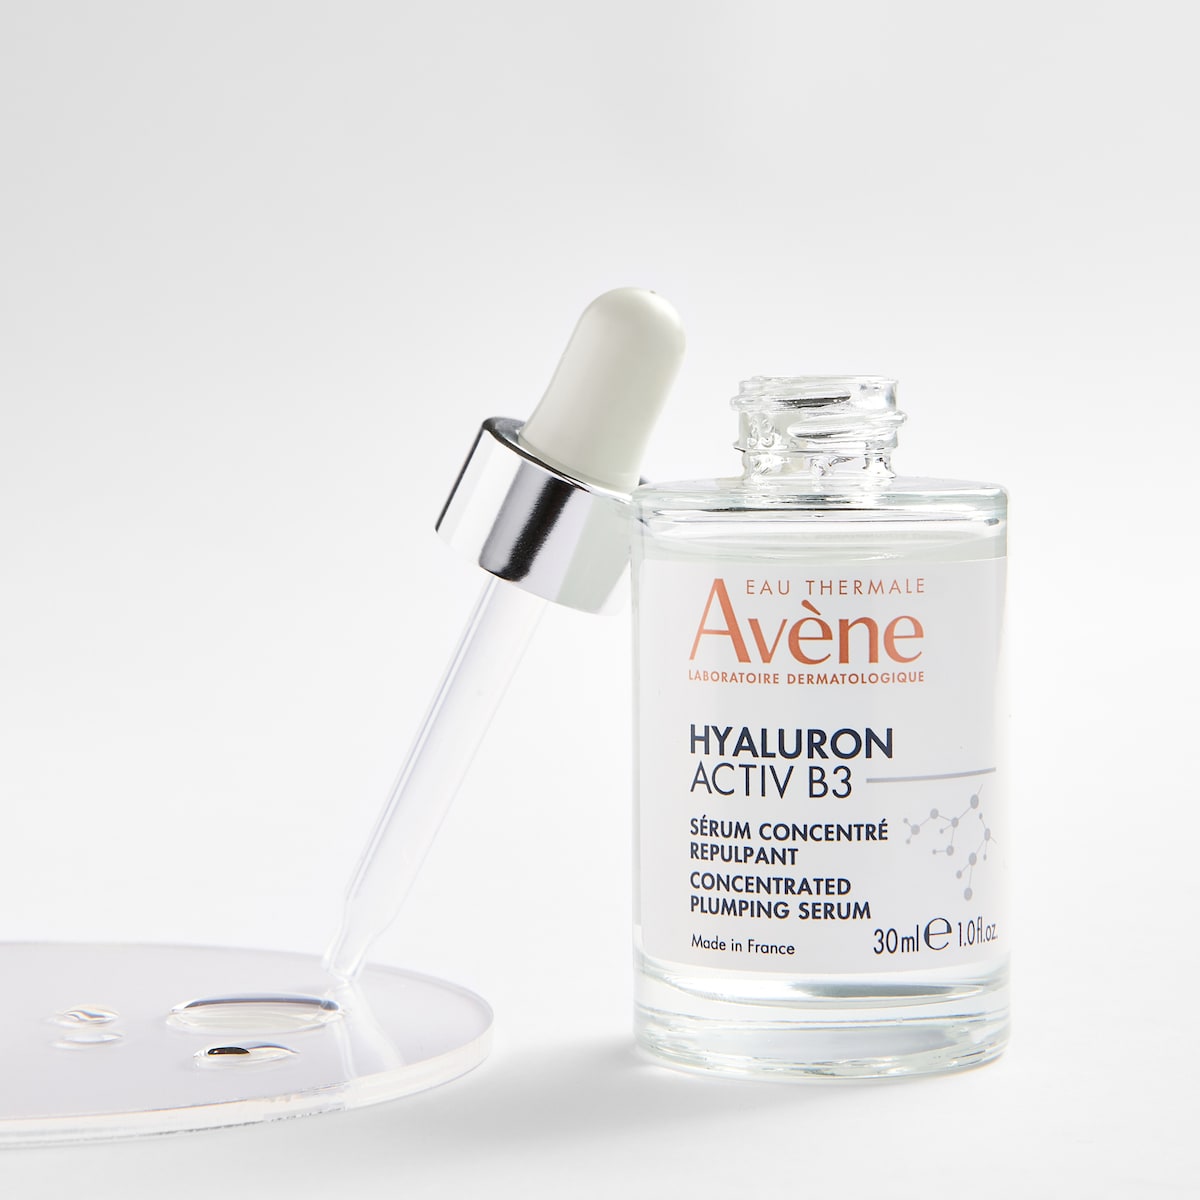 Avene Hyaluron Activ B3 Concentrated Plumping Serum 30Ml